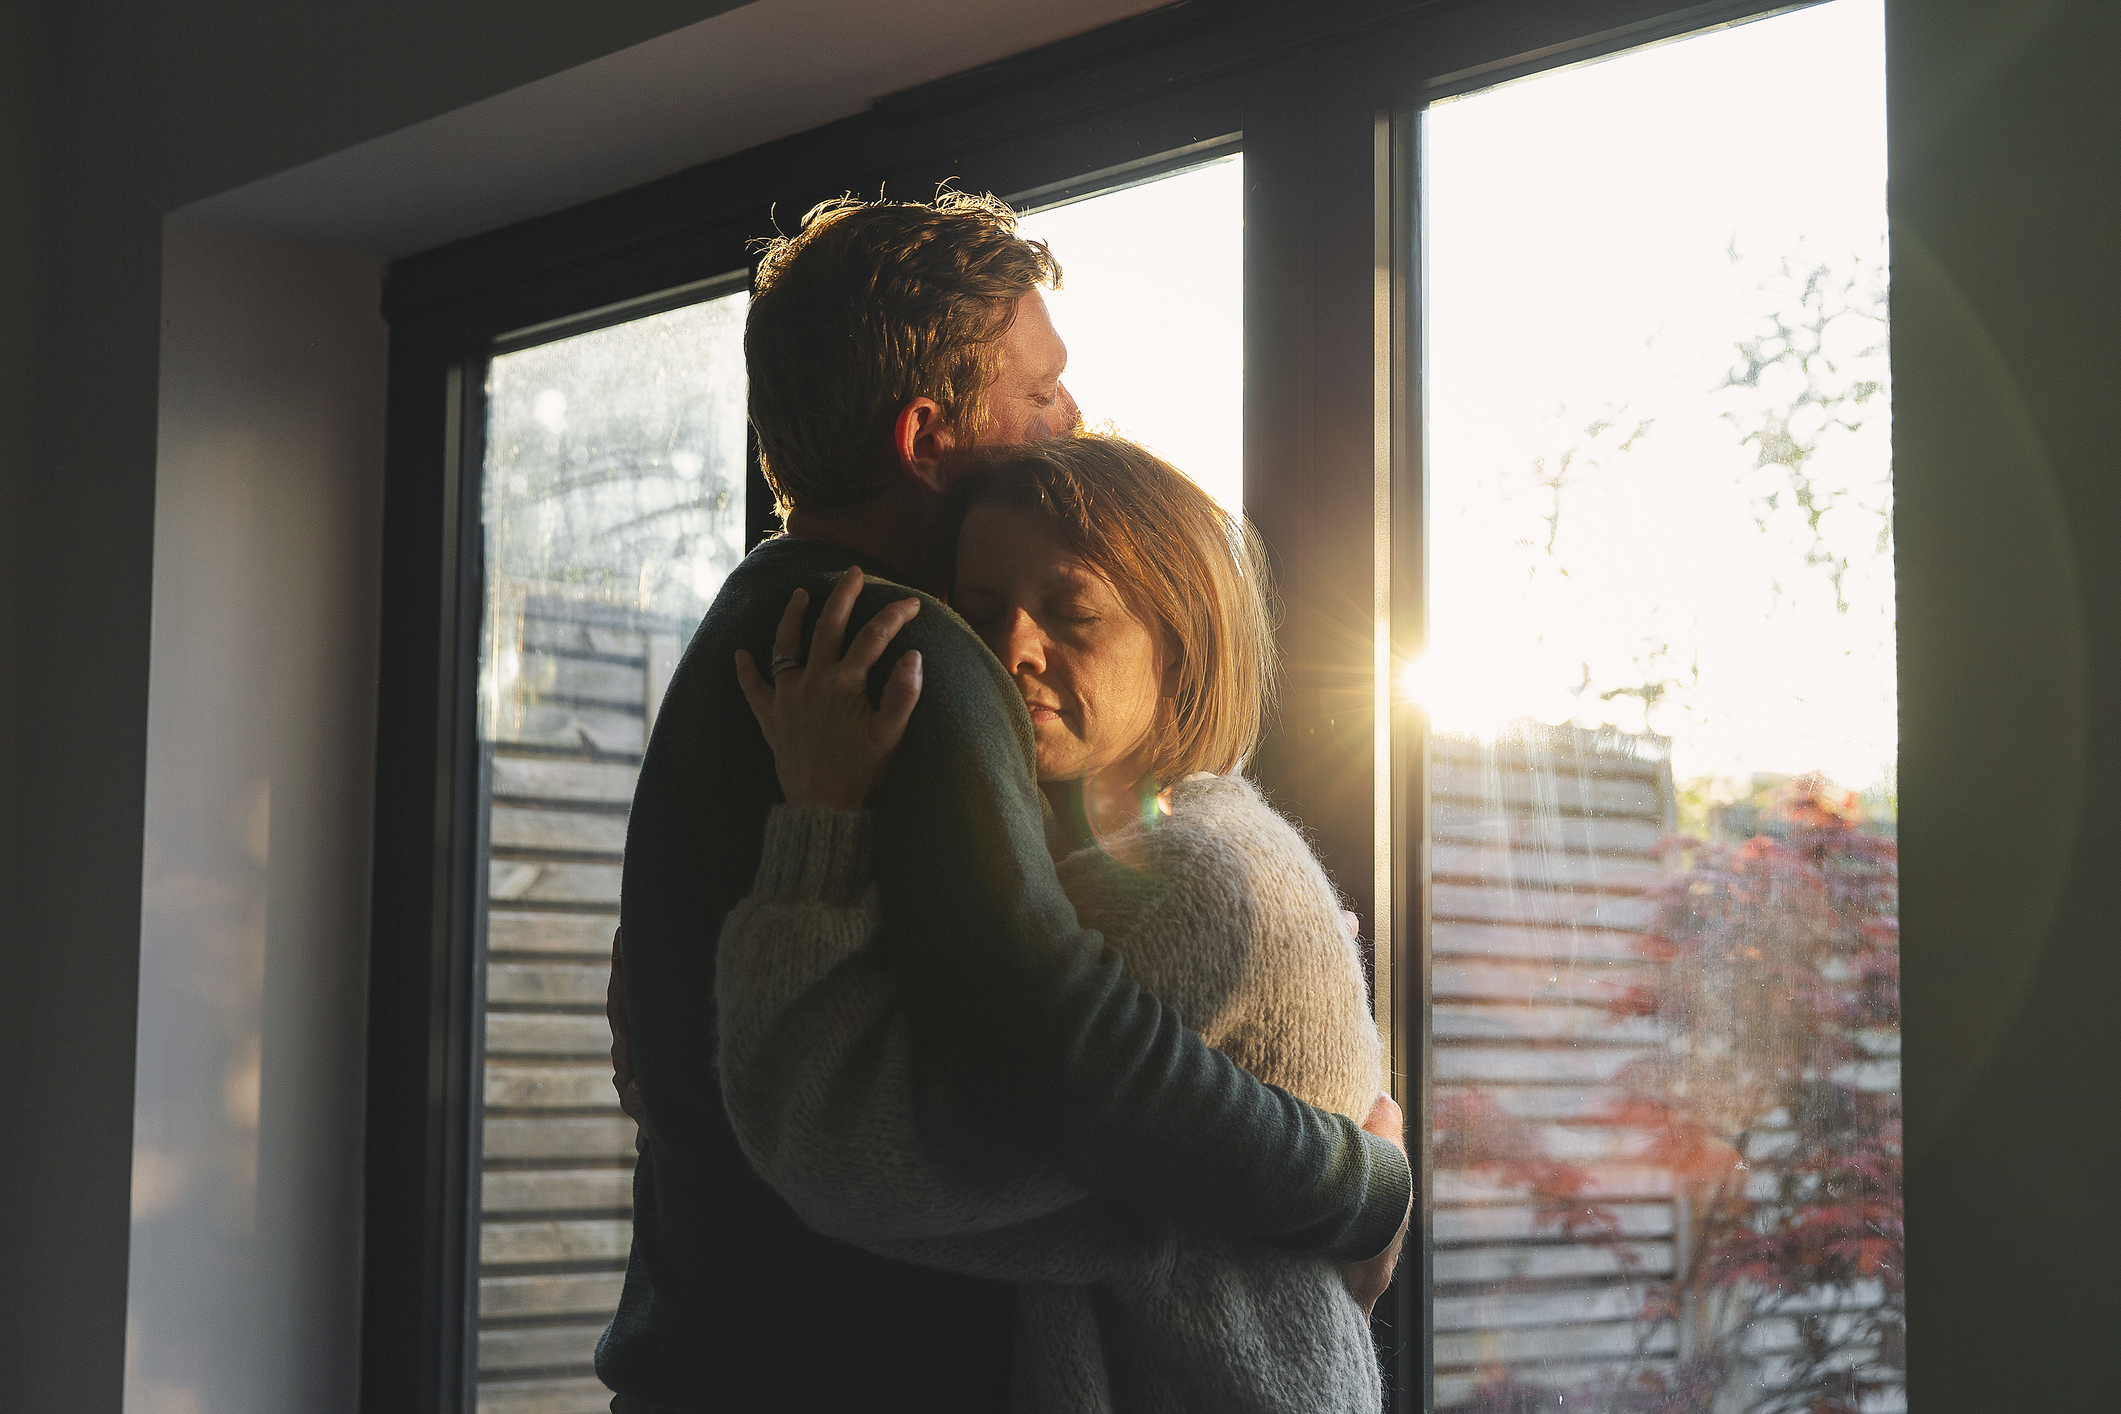 Two people embracing by a window, with soft light shining through